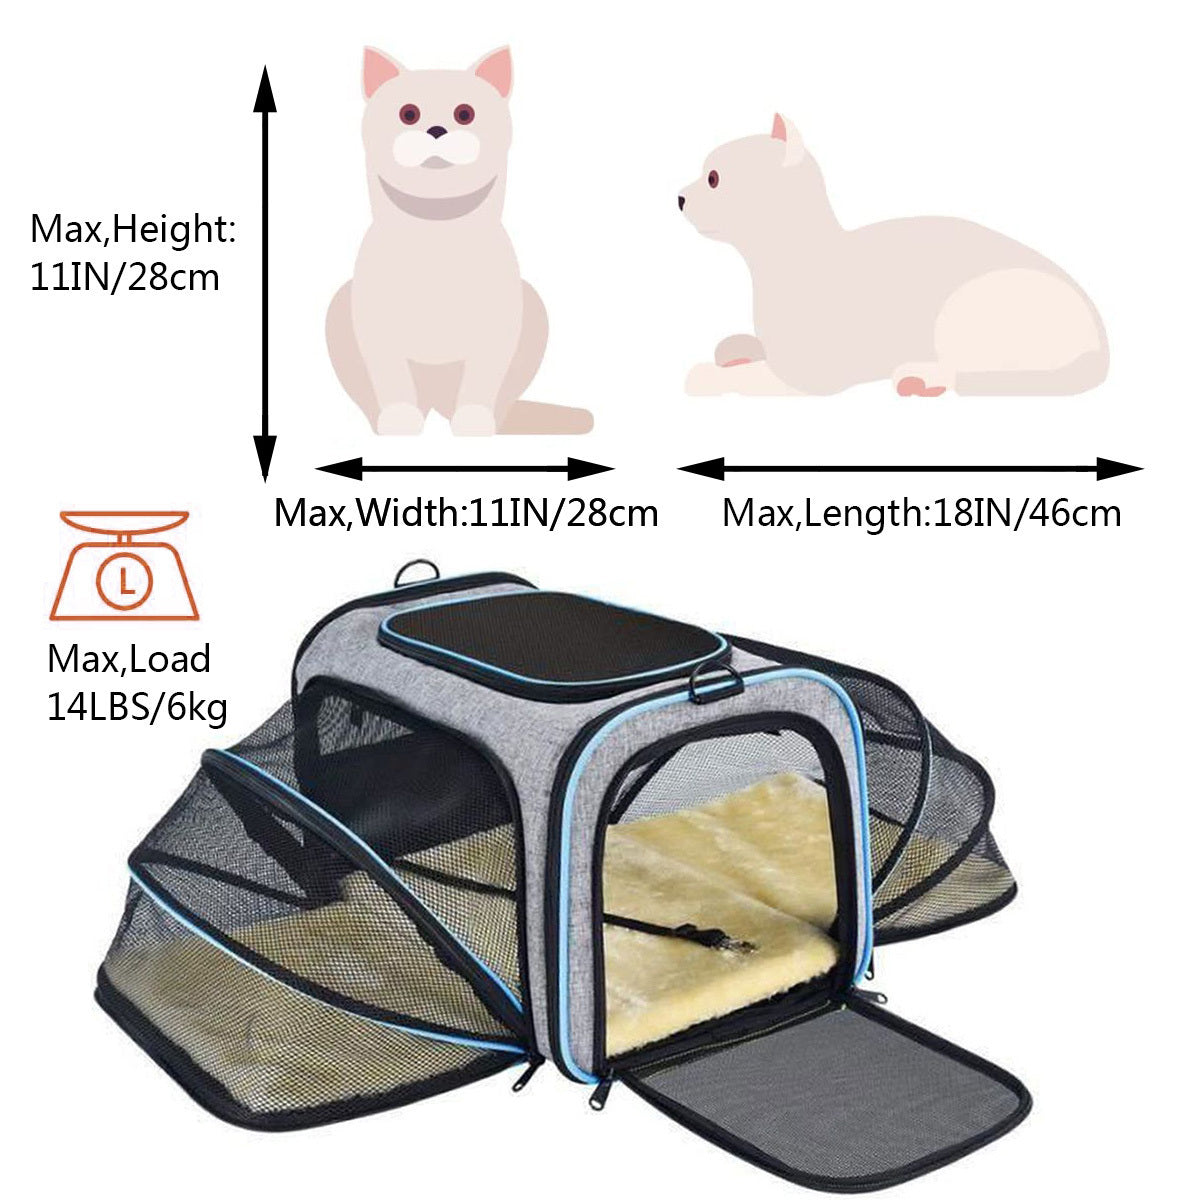 Cat Carrier Dog Carrier Pet Carrier for Small Medium Cats Dogs